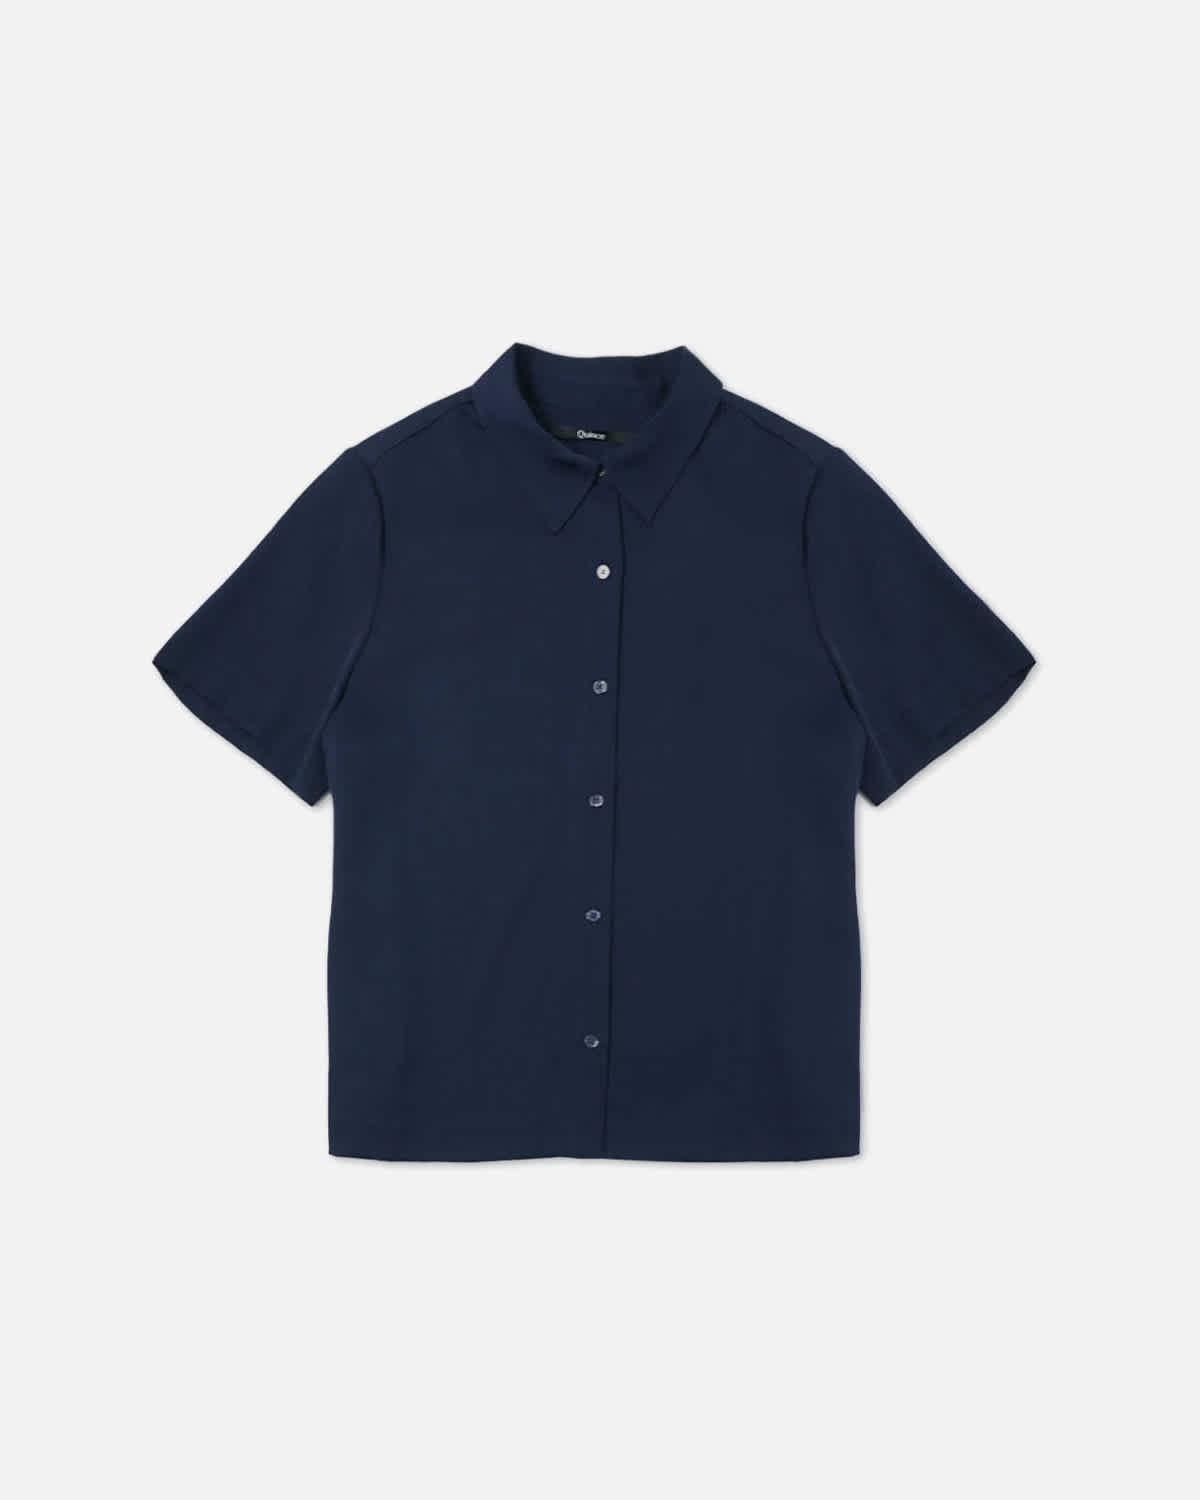 Pair With - Washable Stretch Silk Short Sleeve Blouse - Navy